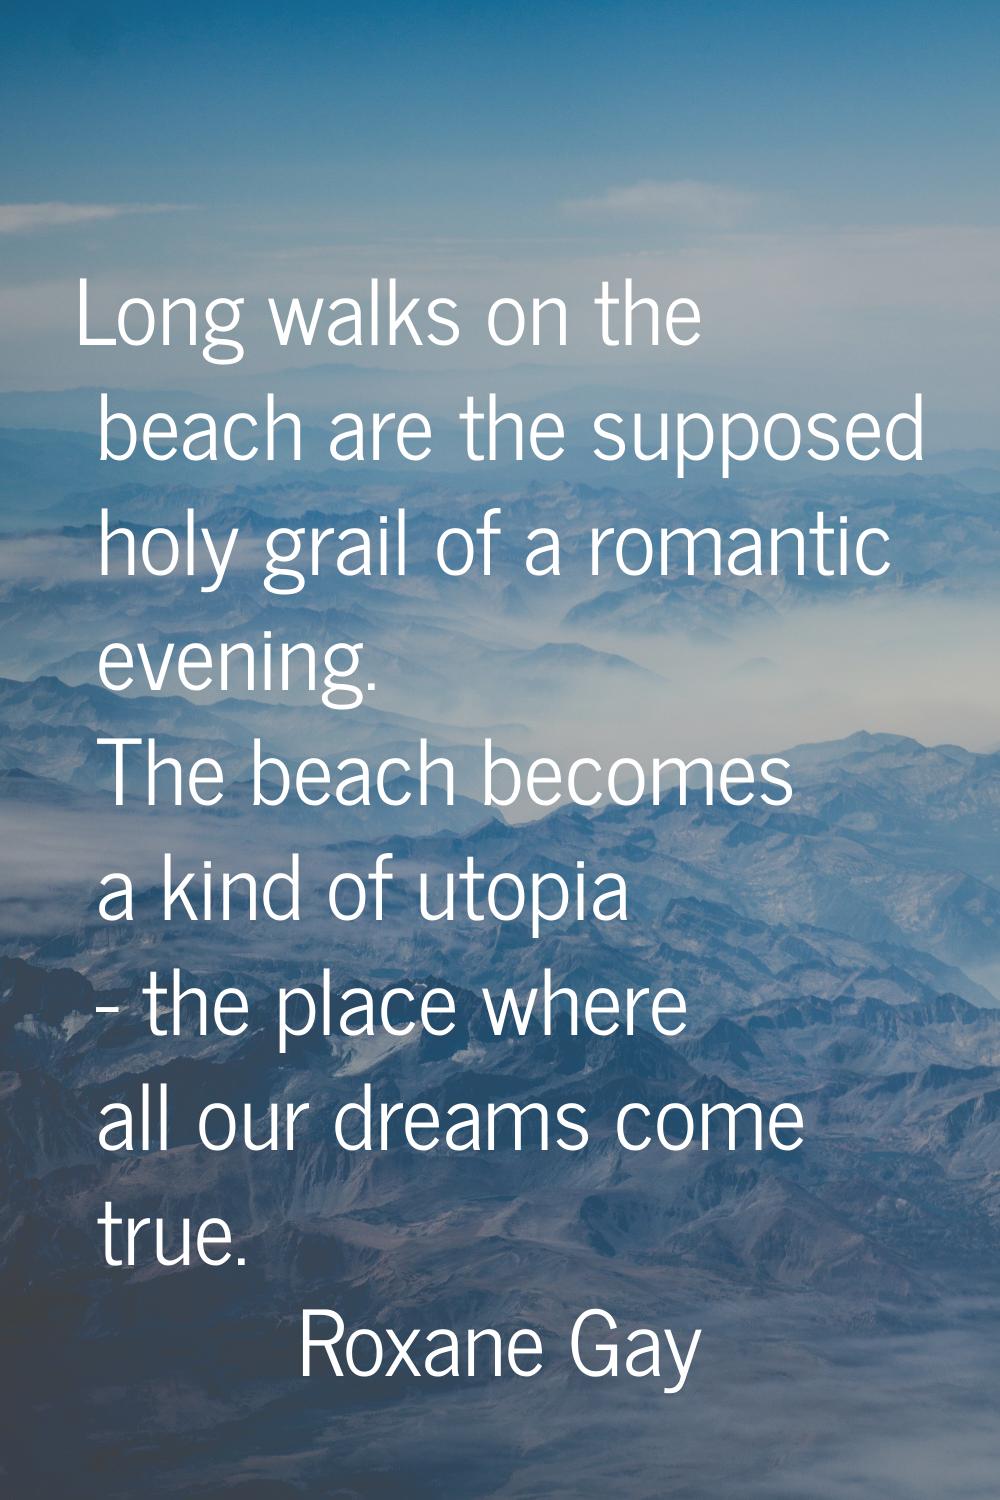 Long walks on the beach are the supposed holy grail of a romantic evening. The beach becomes a kind